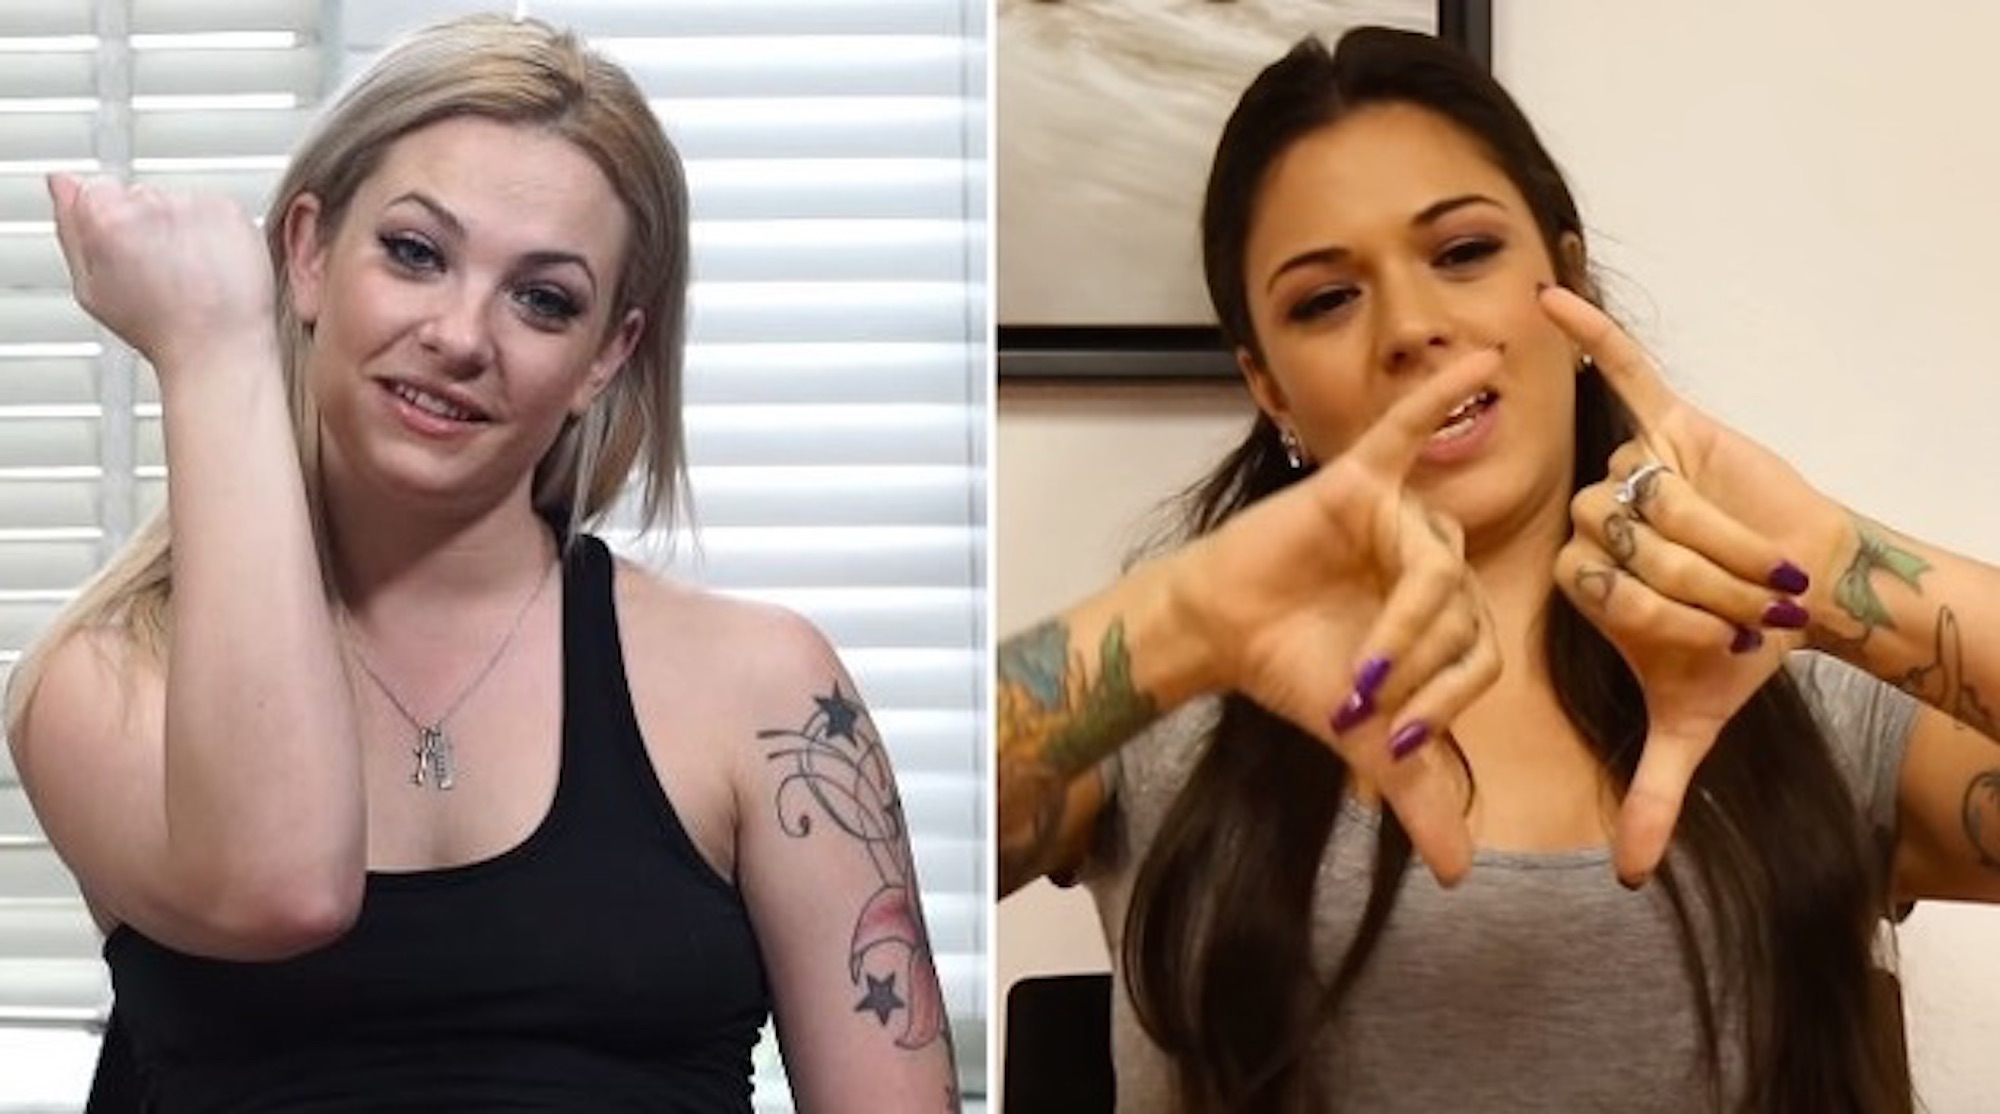 Porn Star Penis - Porn Stars Reveal Their Perfect Penis Size â€“ Sick Chirpse